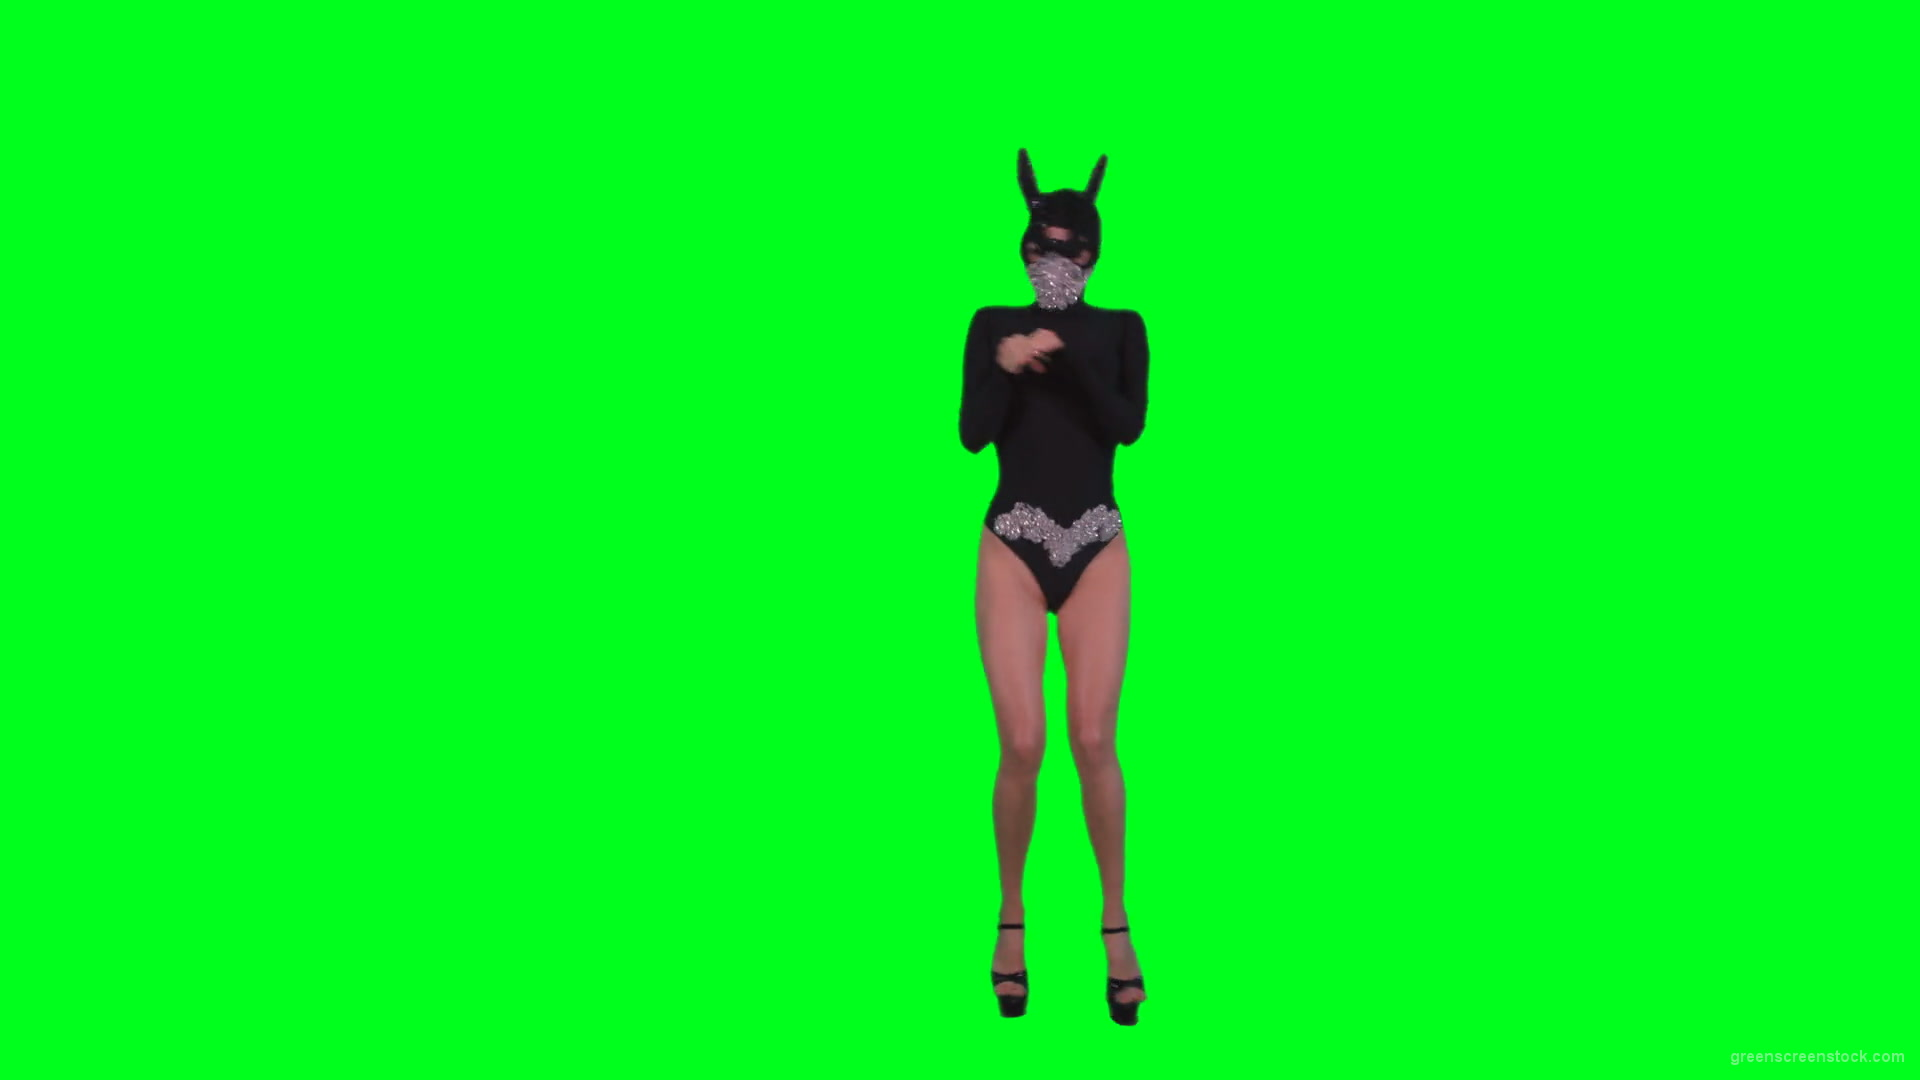 Black-Occult-Banny-Rabbit-dancing-girl-jumping-isolated-on-green-screen-4K-Video-Footage-1920_009 Green Screen Stock